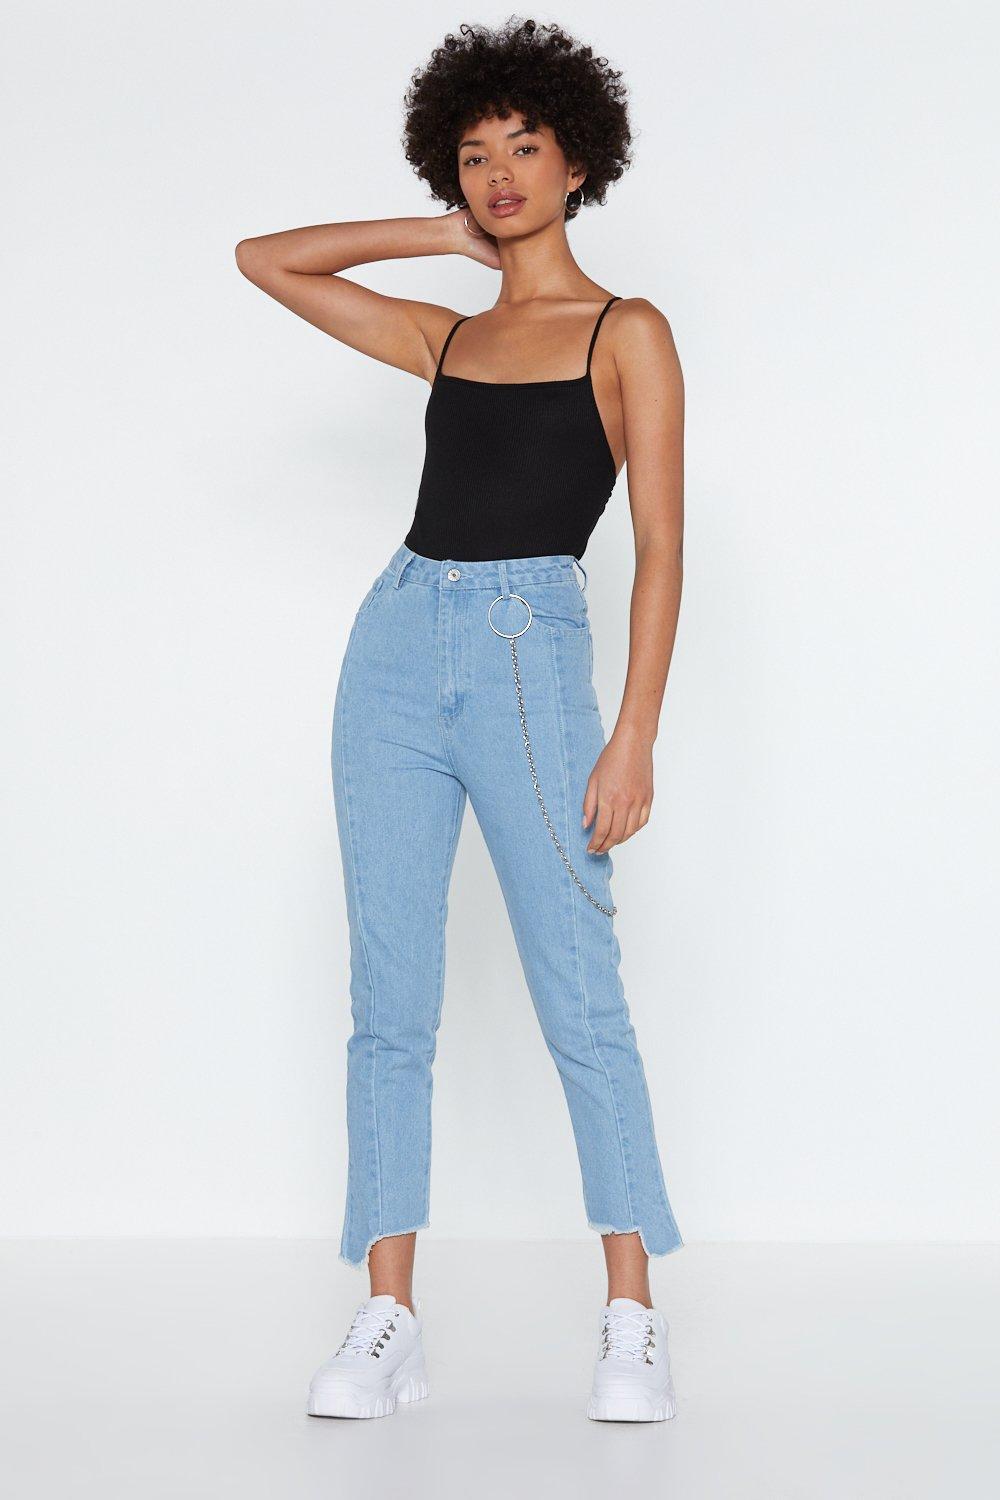 loose end jeans